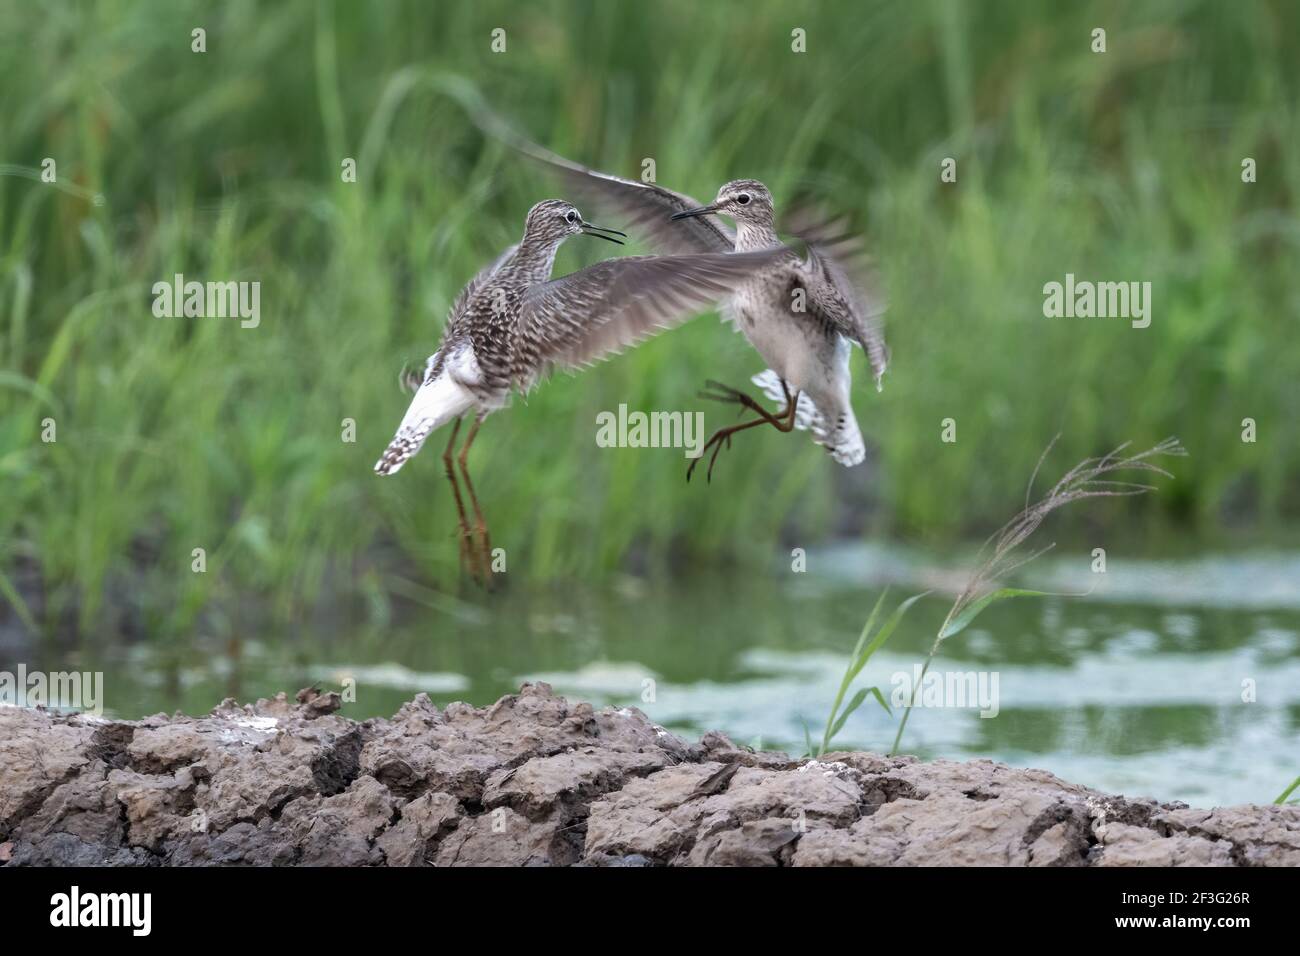 The wood sandpiper (Tringa glareola) is a small wader. This Eurasian species is the smallest of the shanks, which are mid-sized long-legged waders. Stock Photo